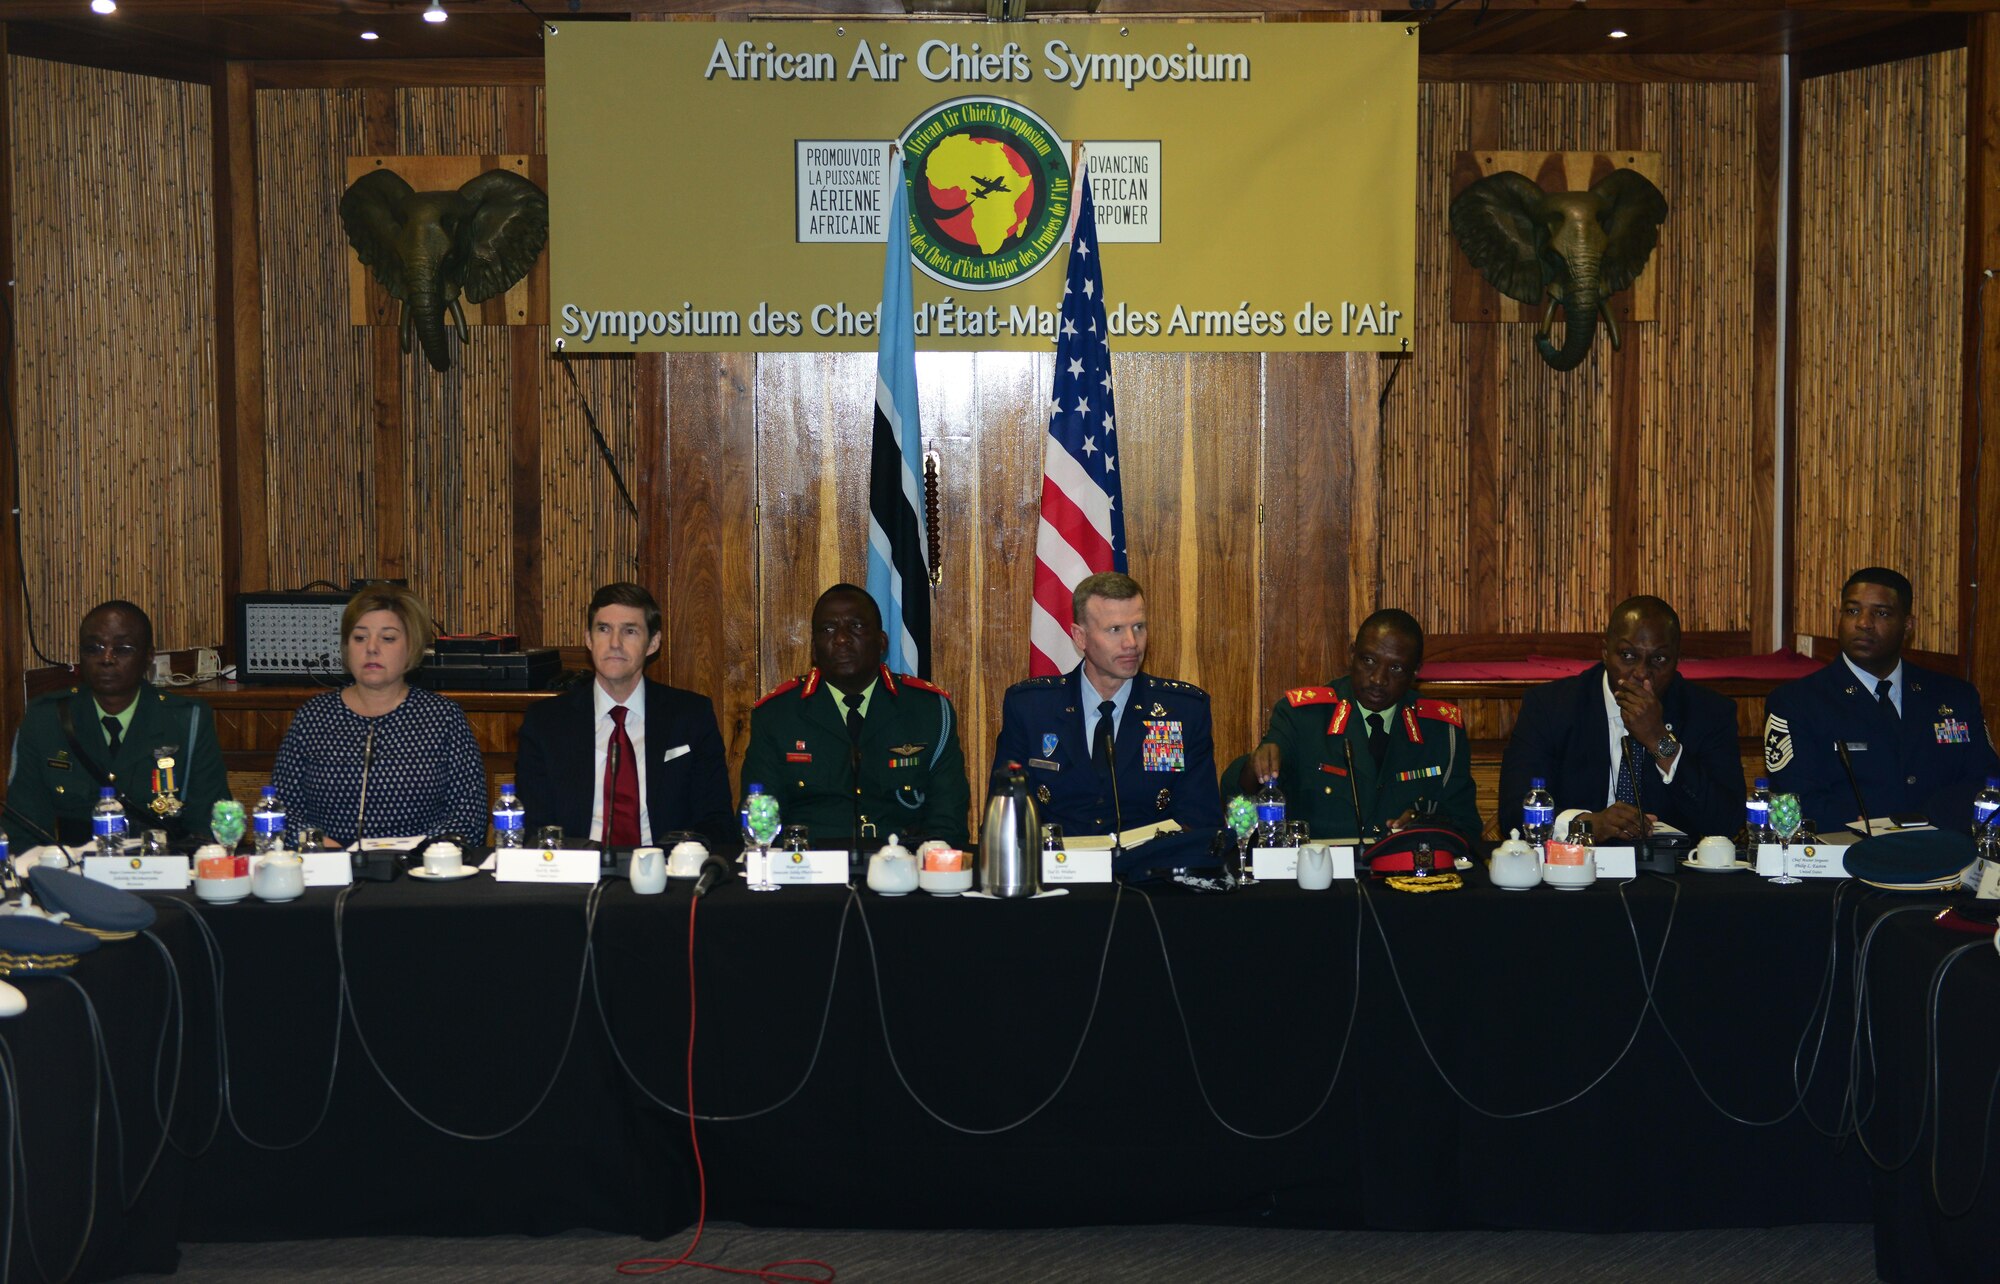 Attendees of the 2017 African Air Chiefs Symposium listen to air chiefs introductions during the opening ceremony in Kasane, Botswana on May 16, 2017. The purpose of the symposium is to create a forum for air chiefs from across the African continent to come together to address regional and continental issues, enhance relationships and increase cooperation. This year's conference will focus on the training aspect of force development. (U.S. Air Force photo by Staff Sgt. Krystal Ardrey)